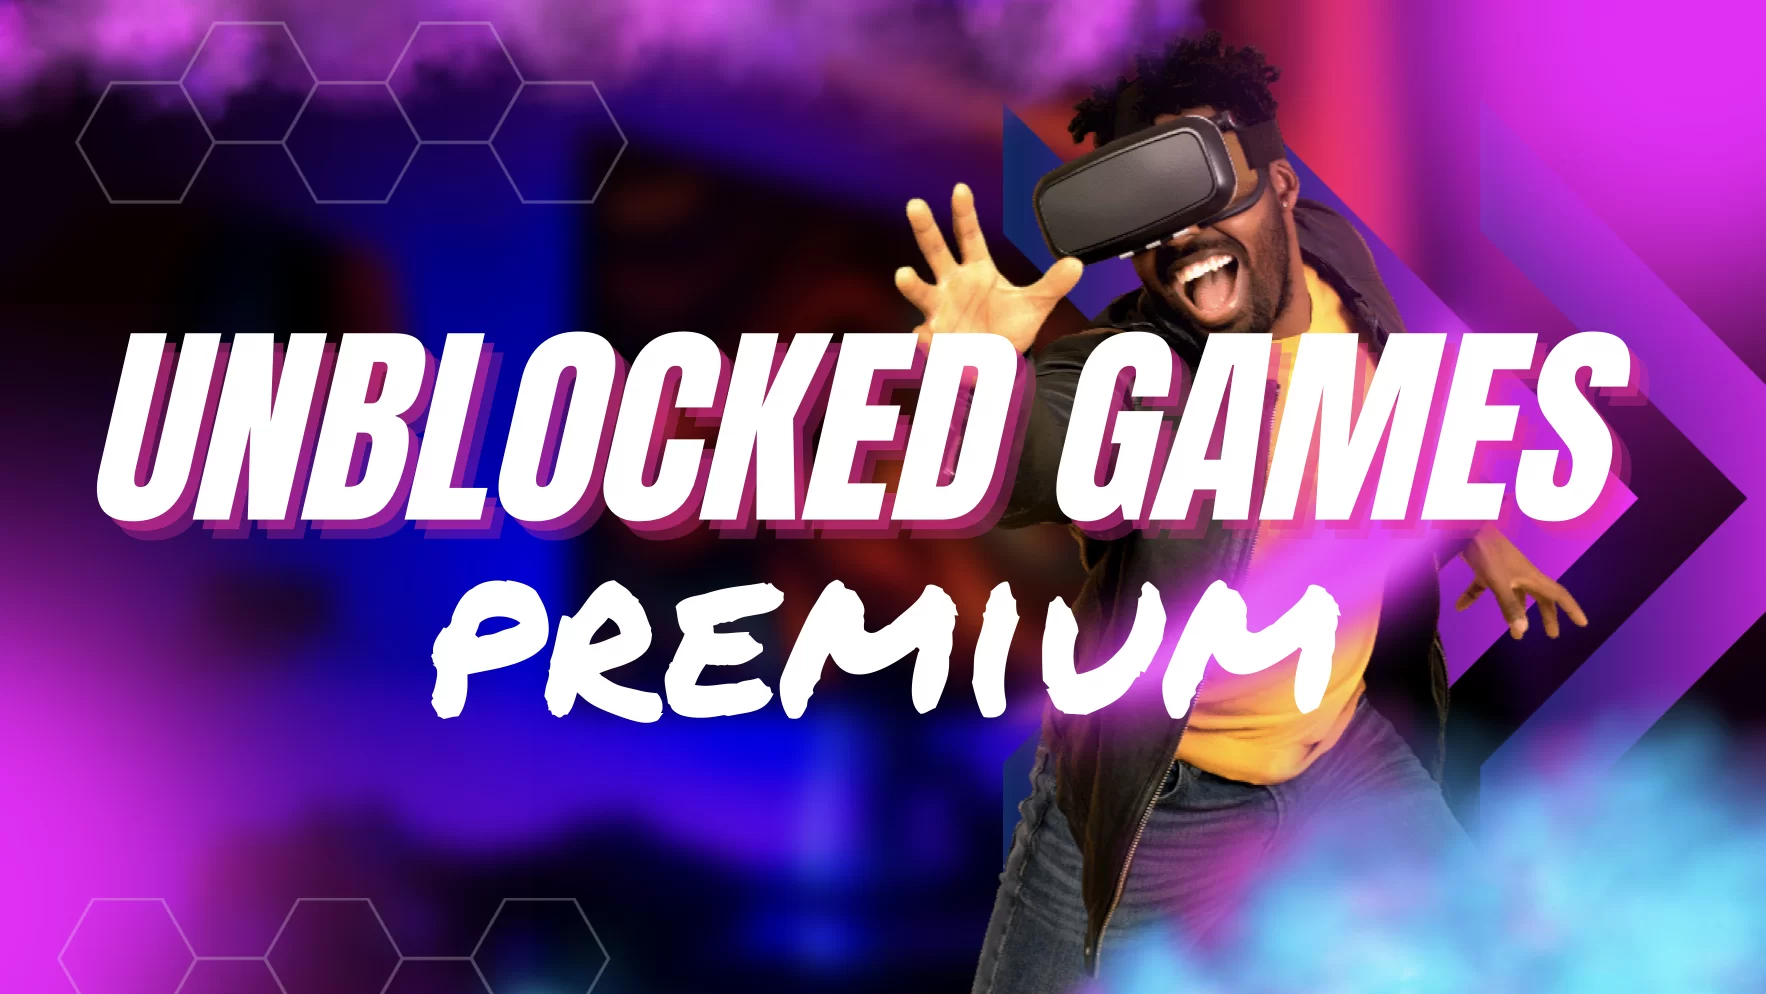 Unblocked Games Premium Enjoy Unlimited Gaming Without Restrictions